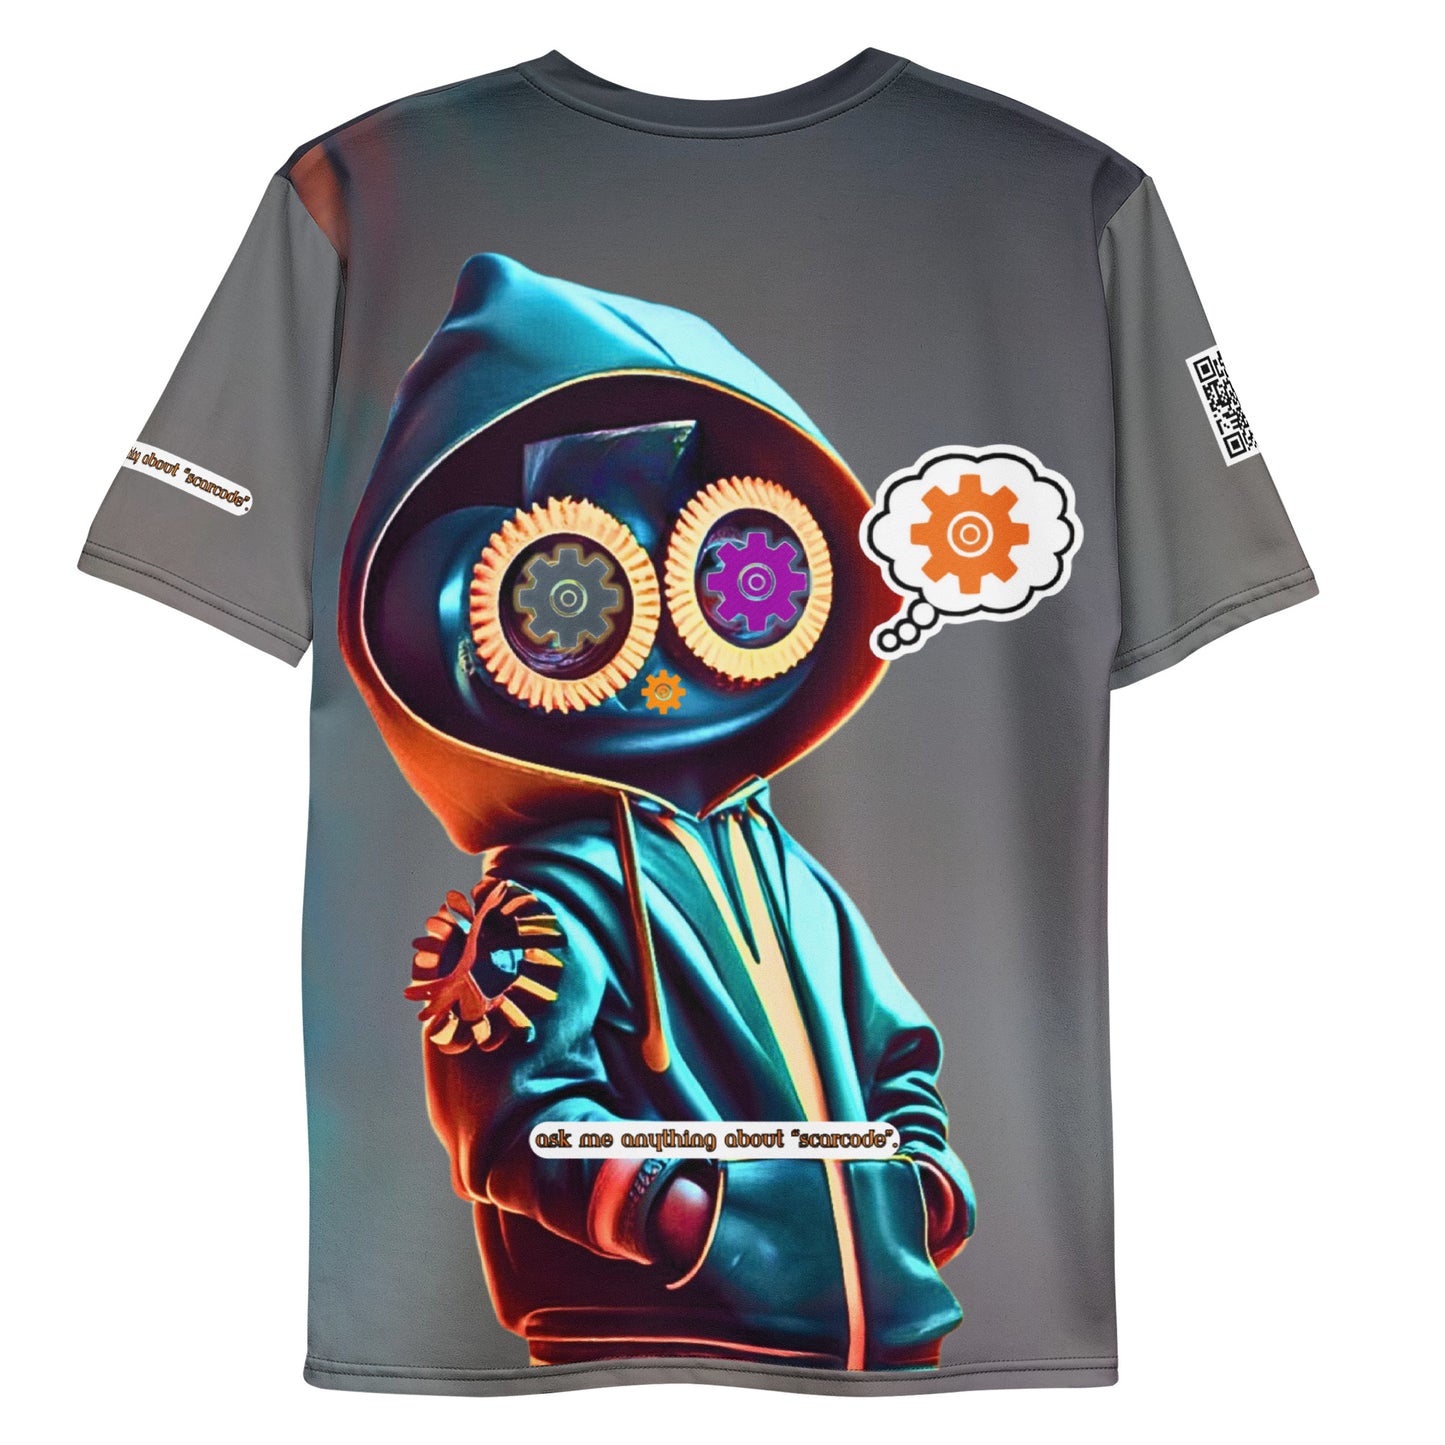 Scarcode AI Bot "Ask me anything about Scarcode" QR Code T-Shirt - 6 SCRCDE